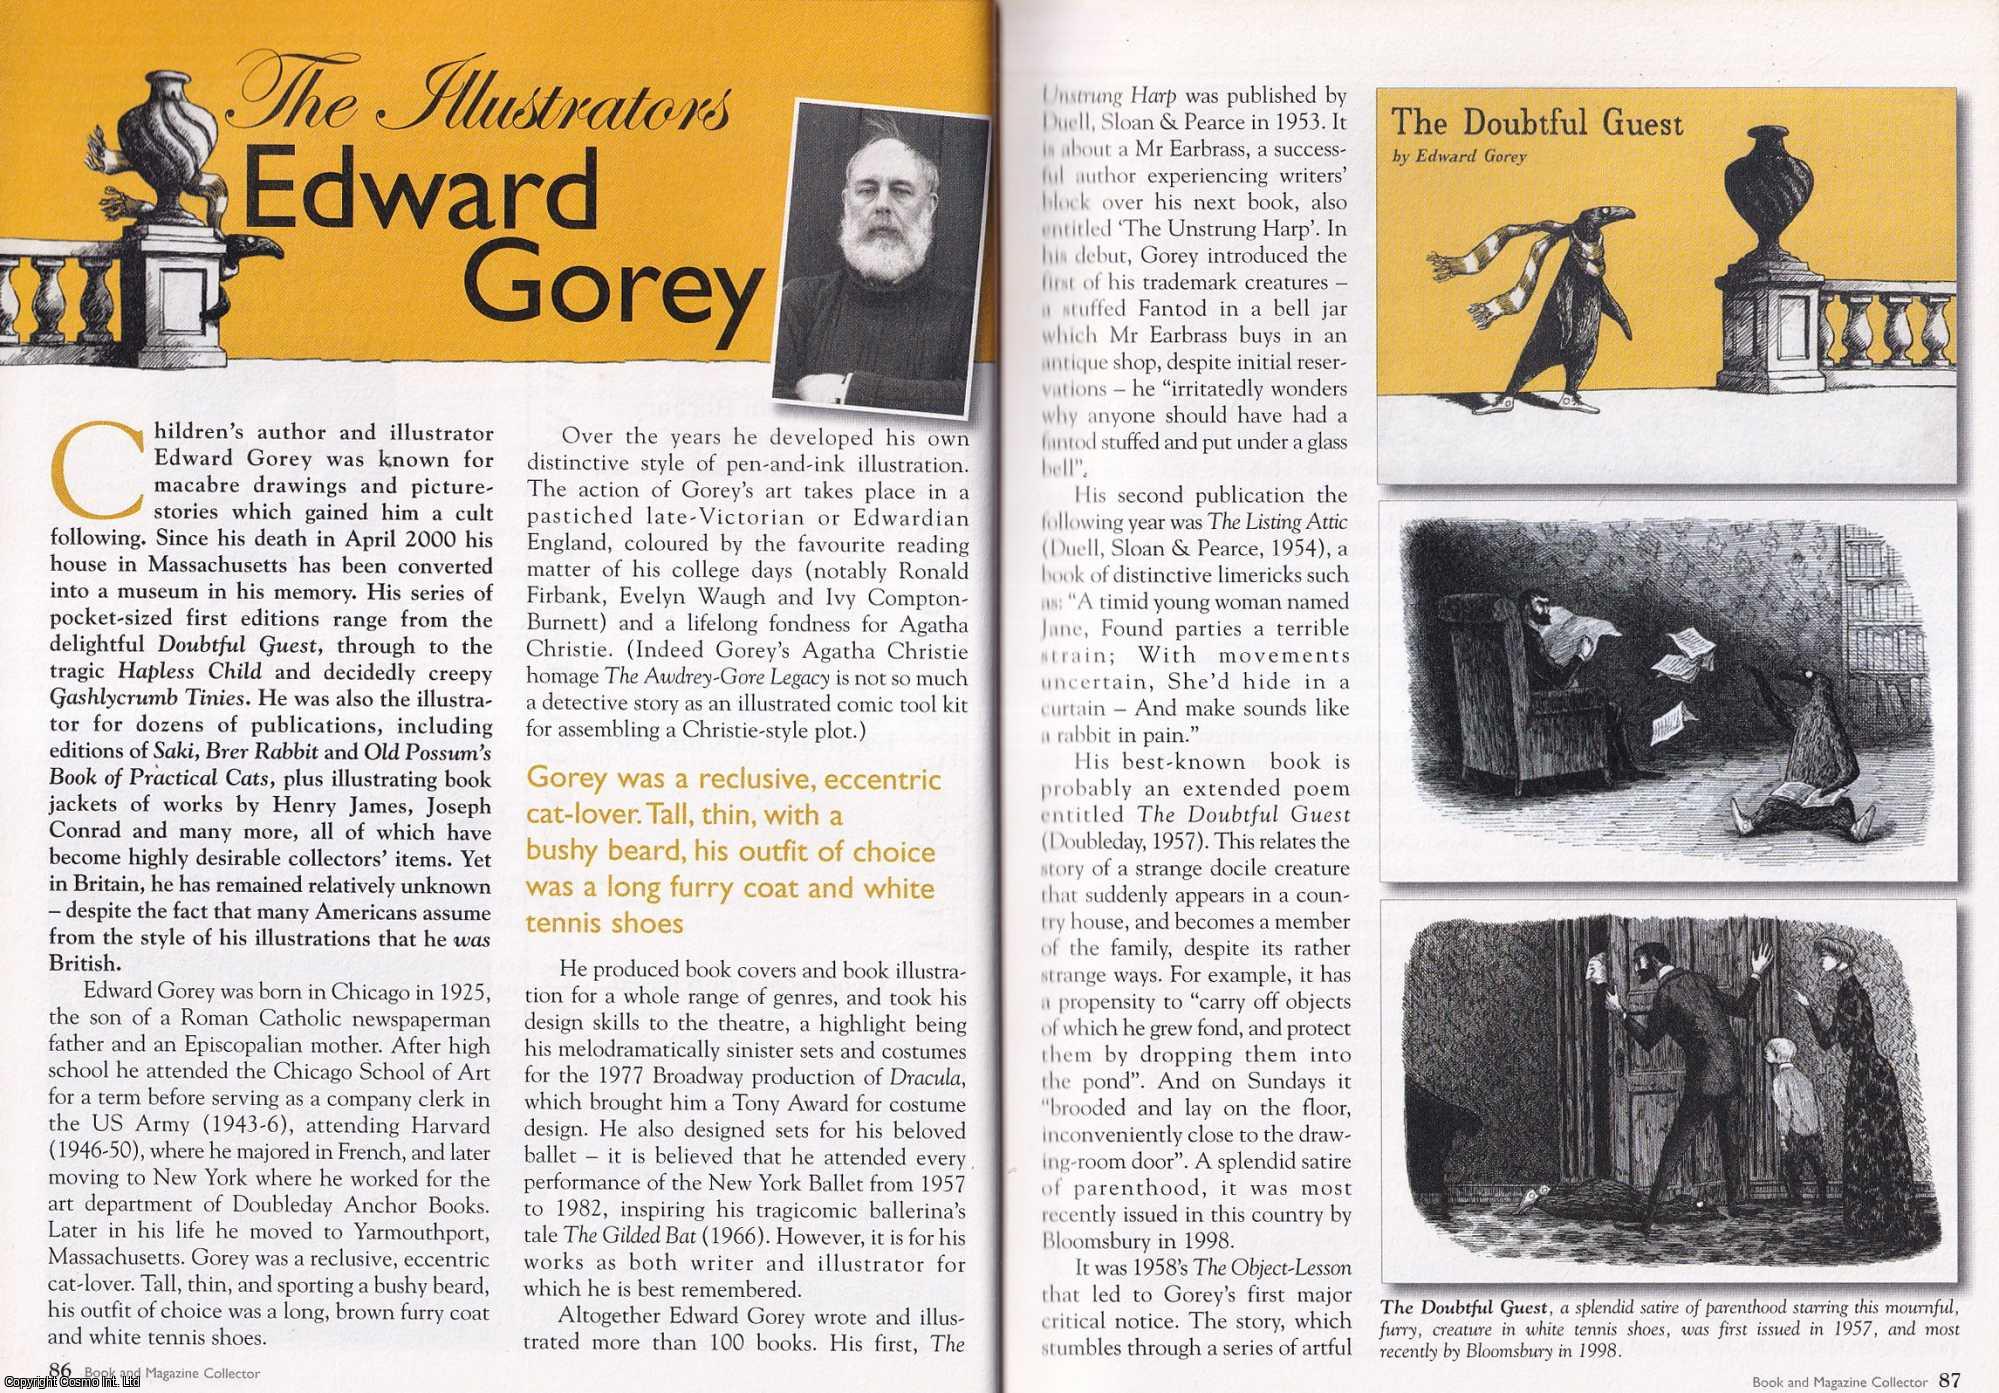 --- - Edward Gorey. This is an original article separated from an issue of The Book & Magazine Collector publication.